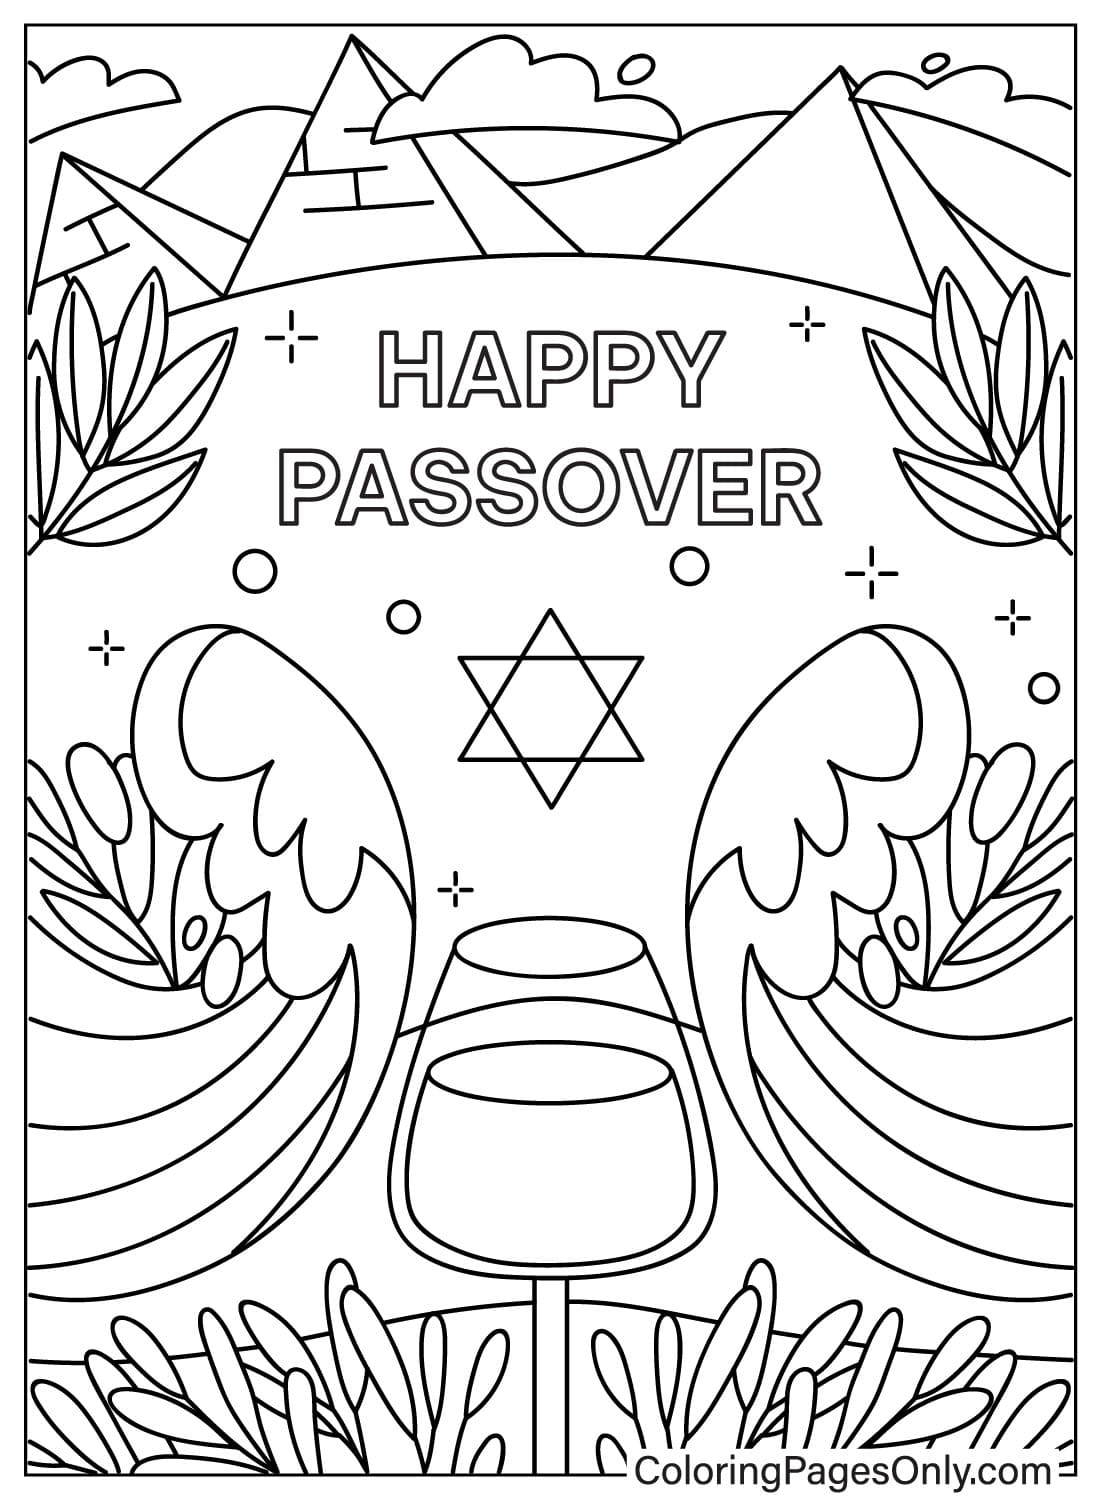 Passover Coloring Book from Passover